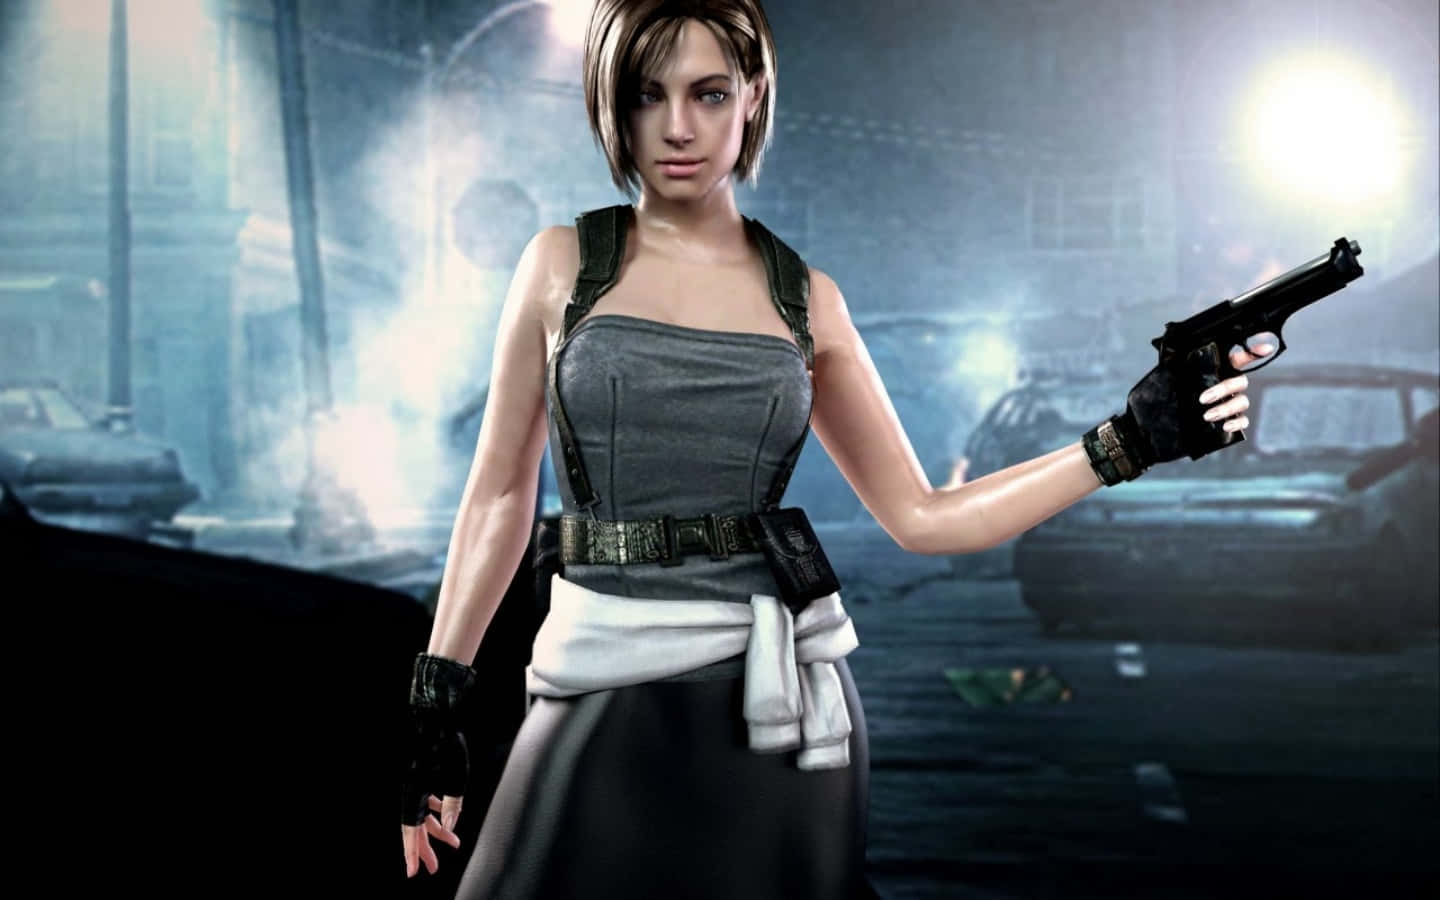 The Elite S.t.a.r.s Jill Valentine Dressed For Combat Wallpaper